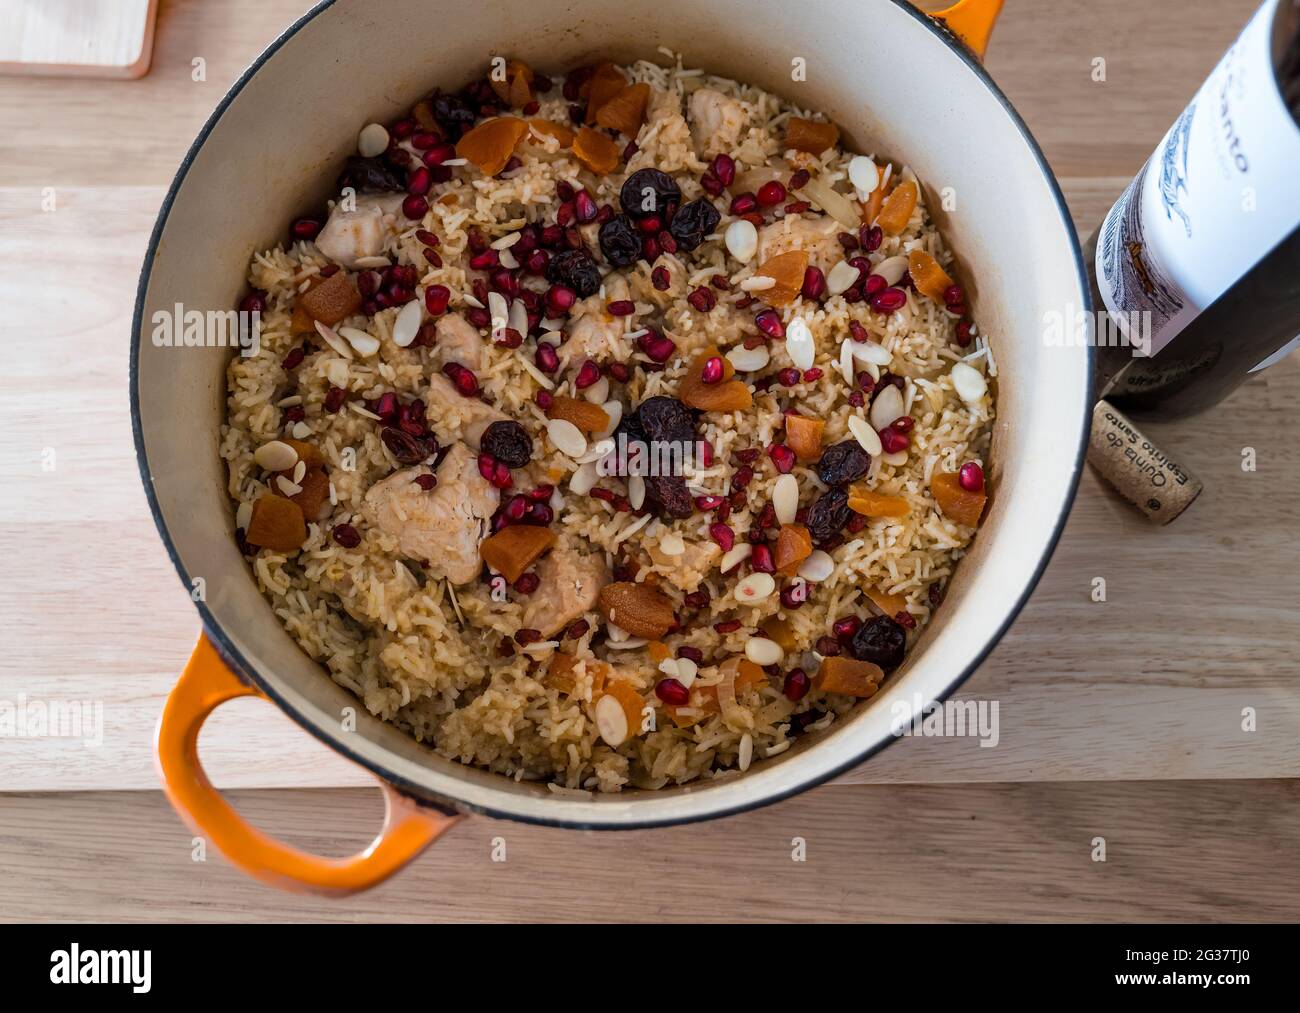 Uzbek plov in casserole dish: a tradtiional meal with chicken, rice, pomegranate seeds, barberries, cherries, apricot and almonds Stock Photo